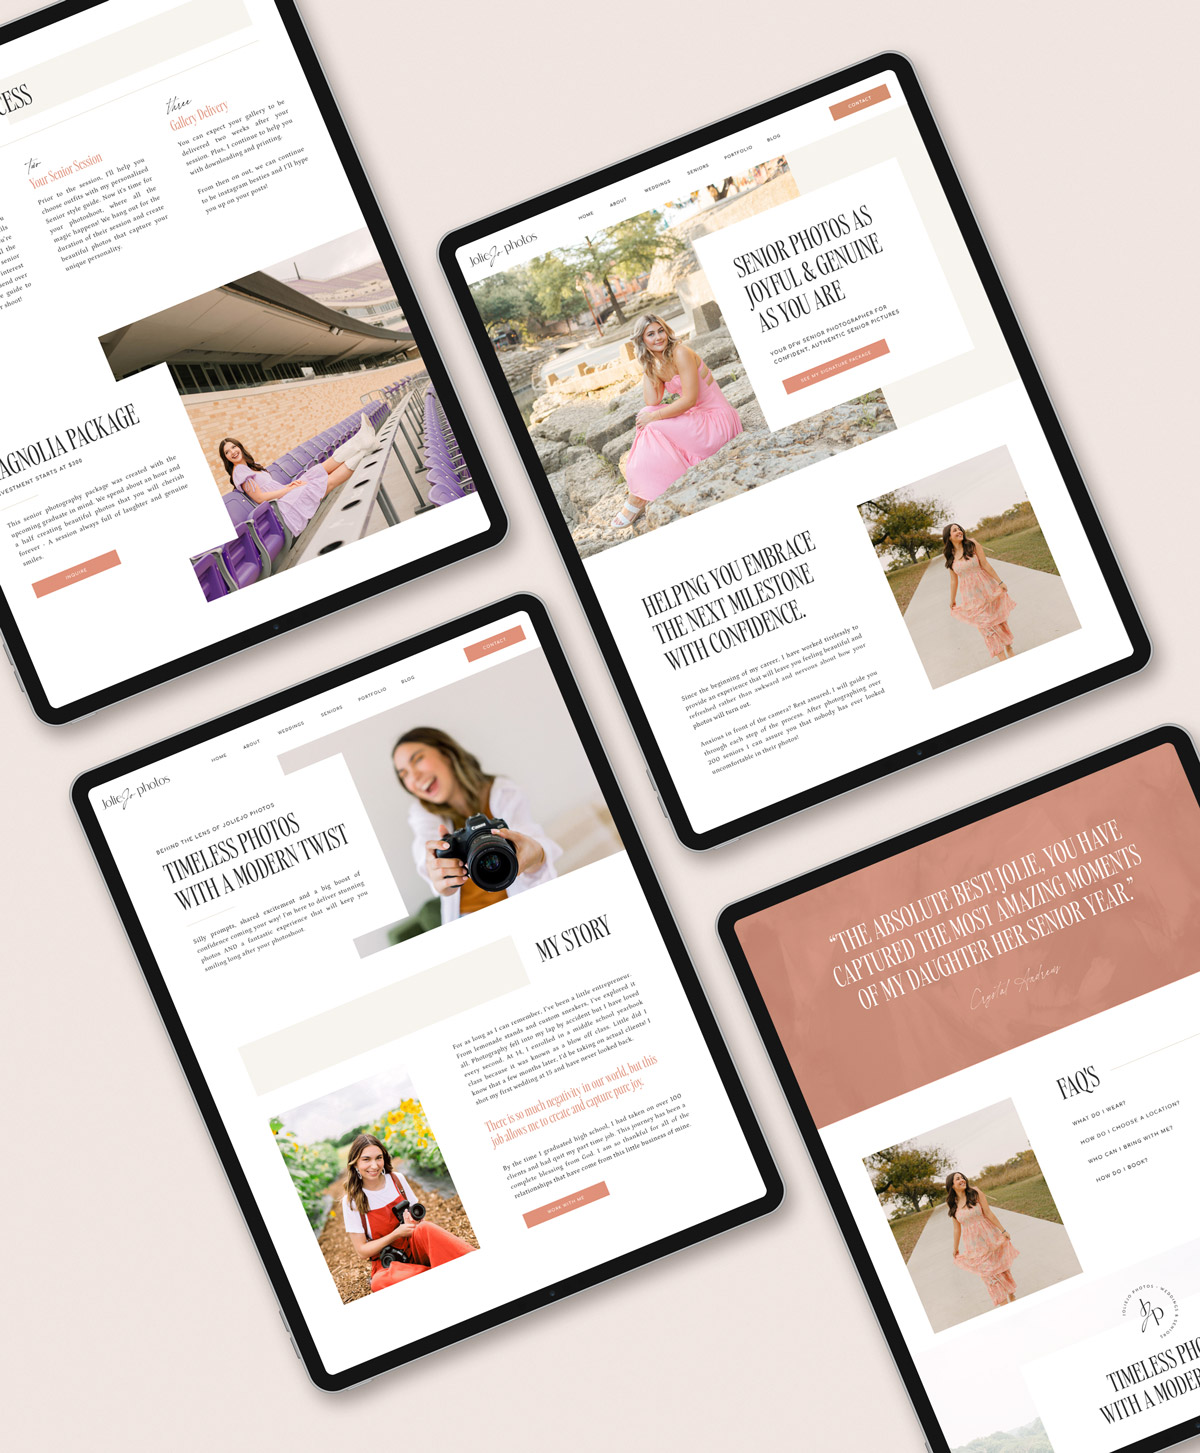 iPad mockups of the brand and Showit website redesign case study for Jolie Jo Photography